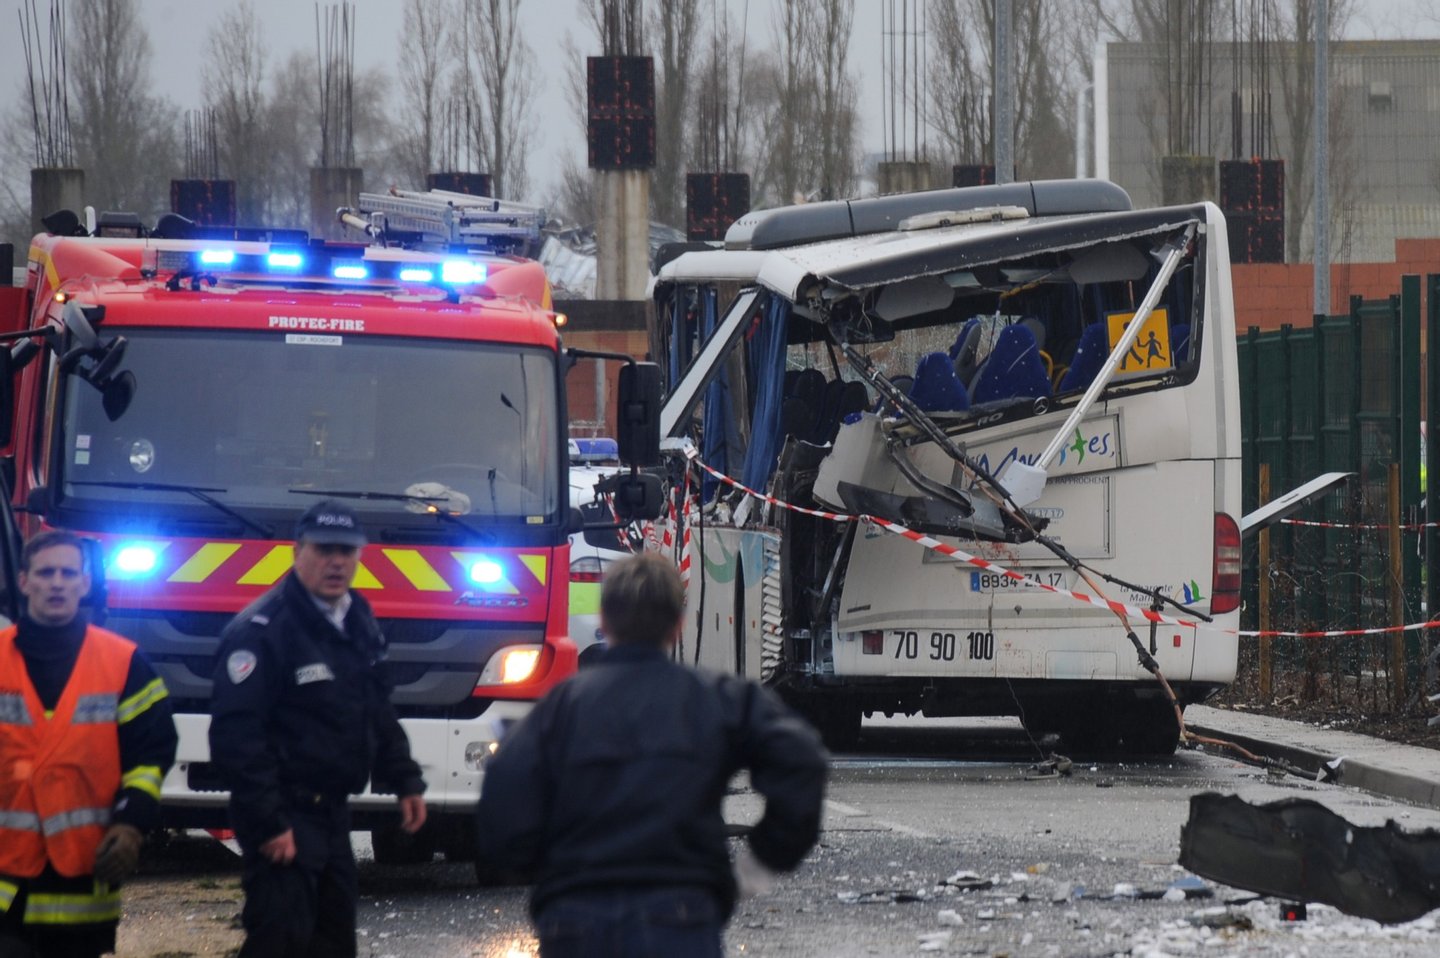 A French police officer stands near the wreckage of a school minibus after it crashed into a truck near Rochefort on February 11, 2016, killing at least six children, police said, a day after another road accident involving a school bus left two youngsters dead. The head-on smash with a lorry carrying rubble came around 7:15 am (0615 GMT) near Rochefort in the western Charente-Maritime region. / AFP / XAVIER LEOTY (Photo credit should read XAVIER LEOTY/AFP/Getty Images)